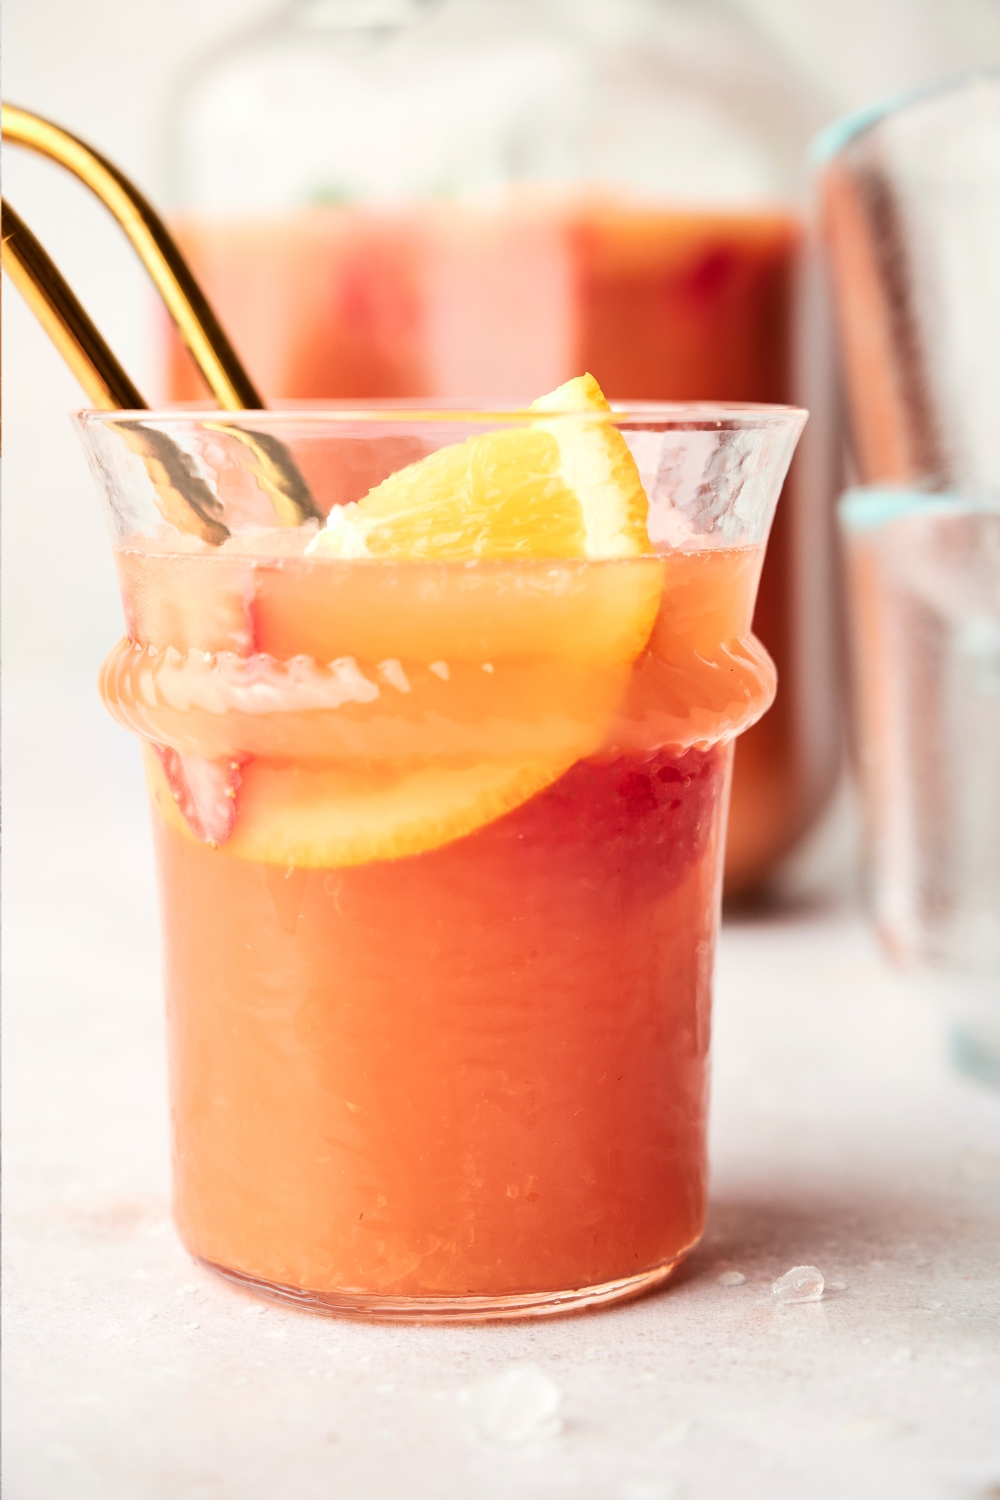 A small glass of jungle juice has an orange slice and two golden straws in it.